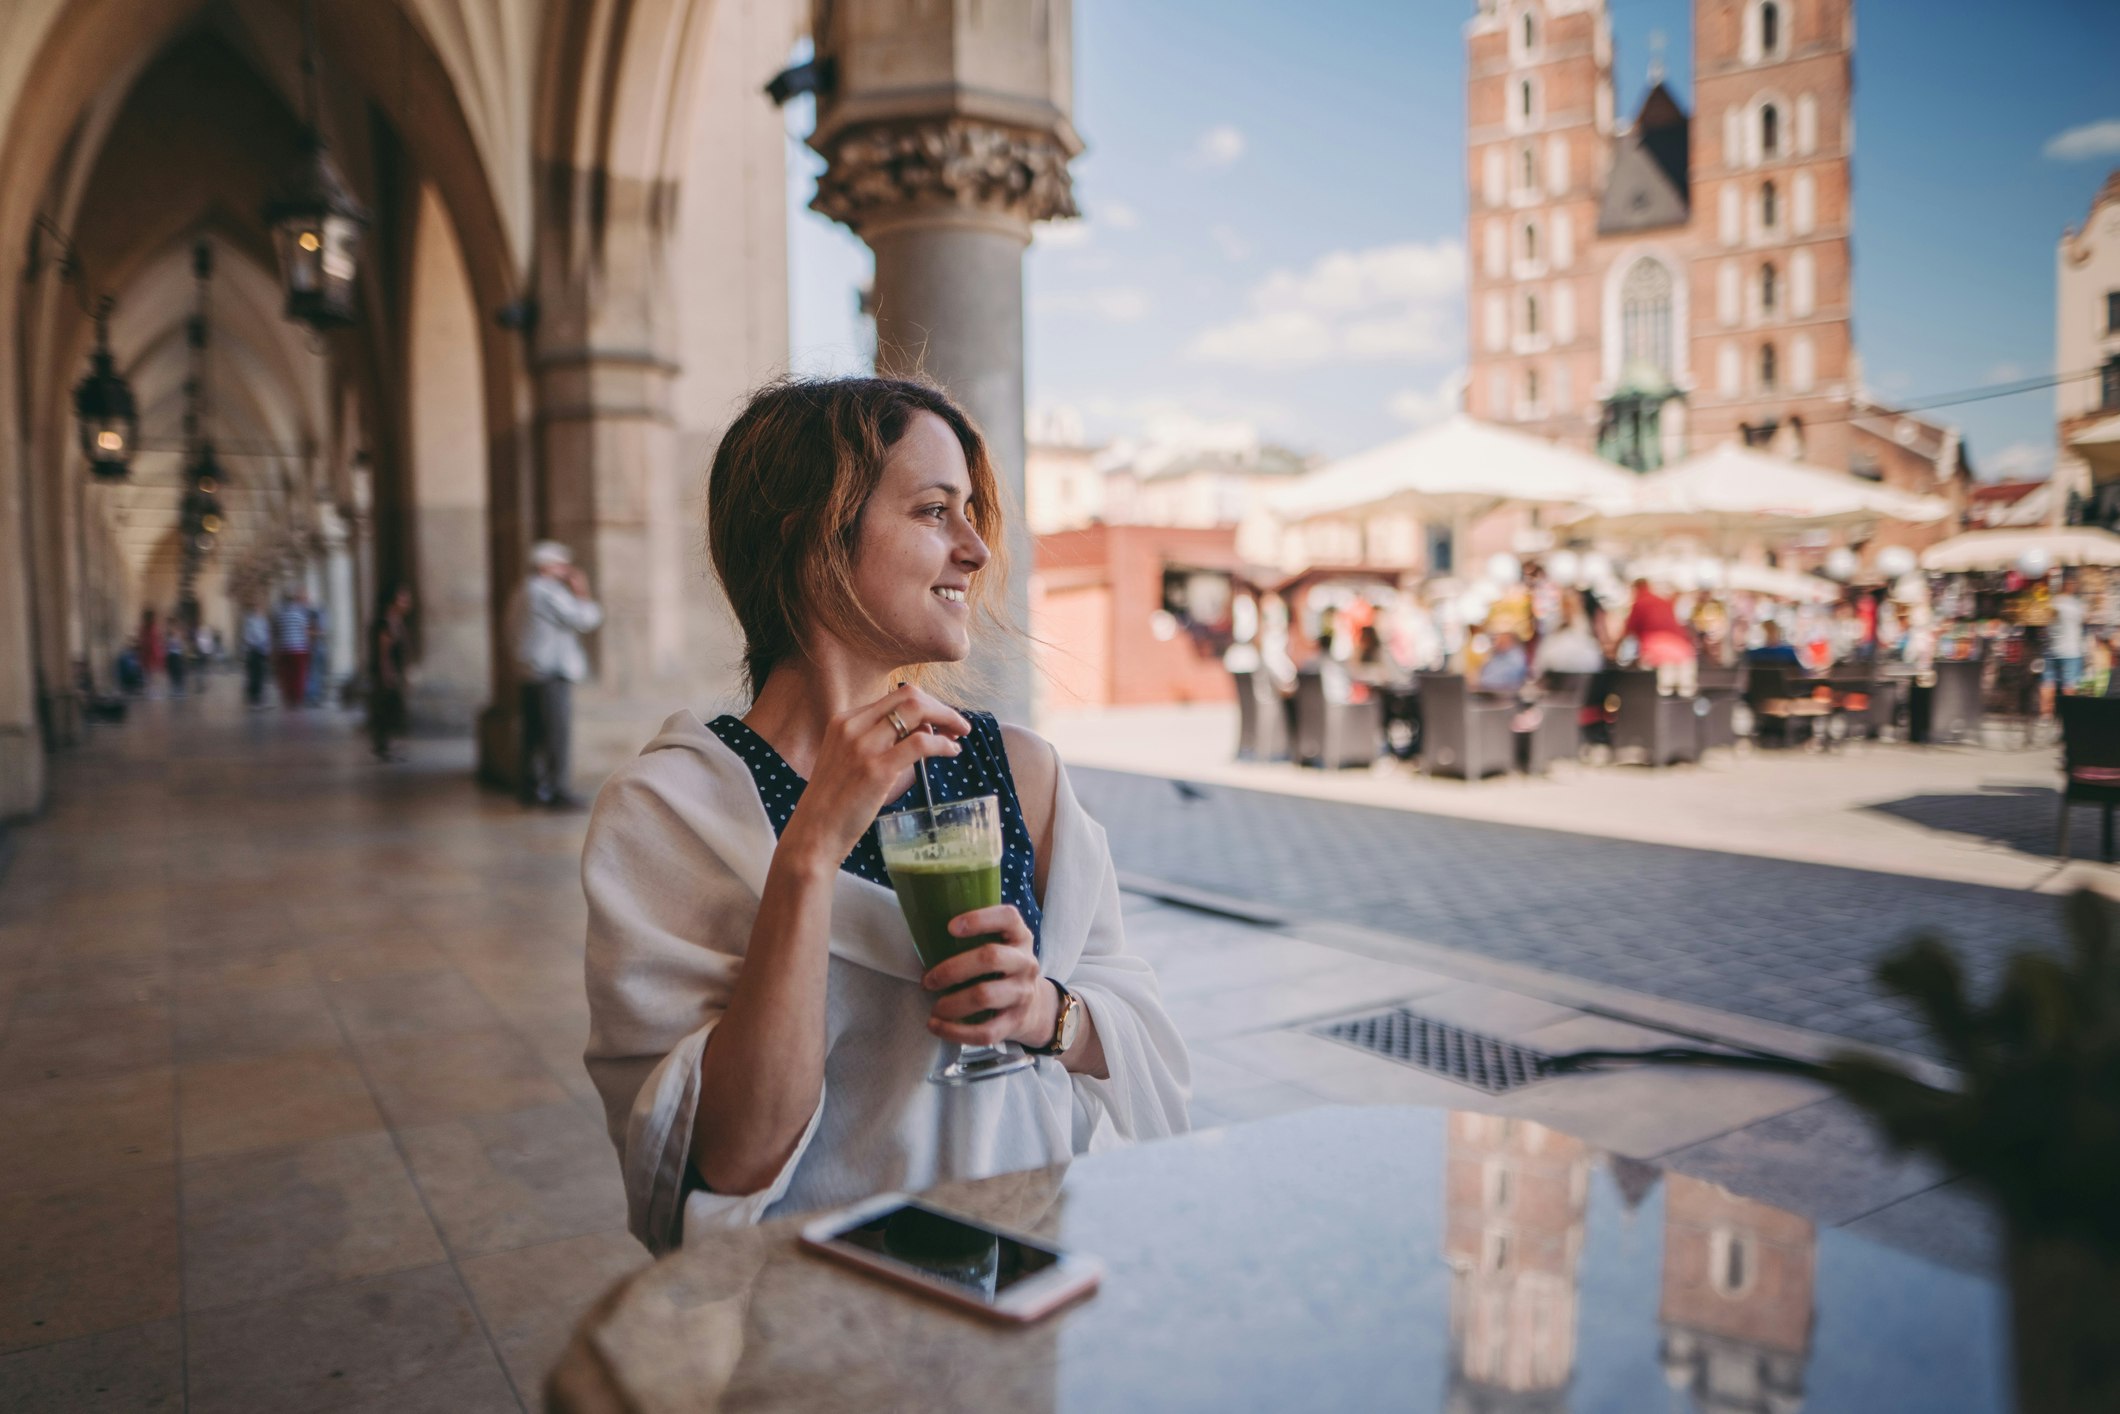 Relaxed woman at cafe drinking green smoothie and enjoying the old town of Krakow